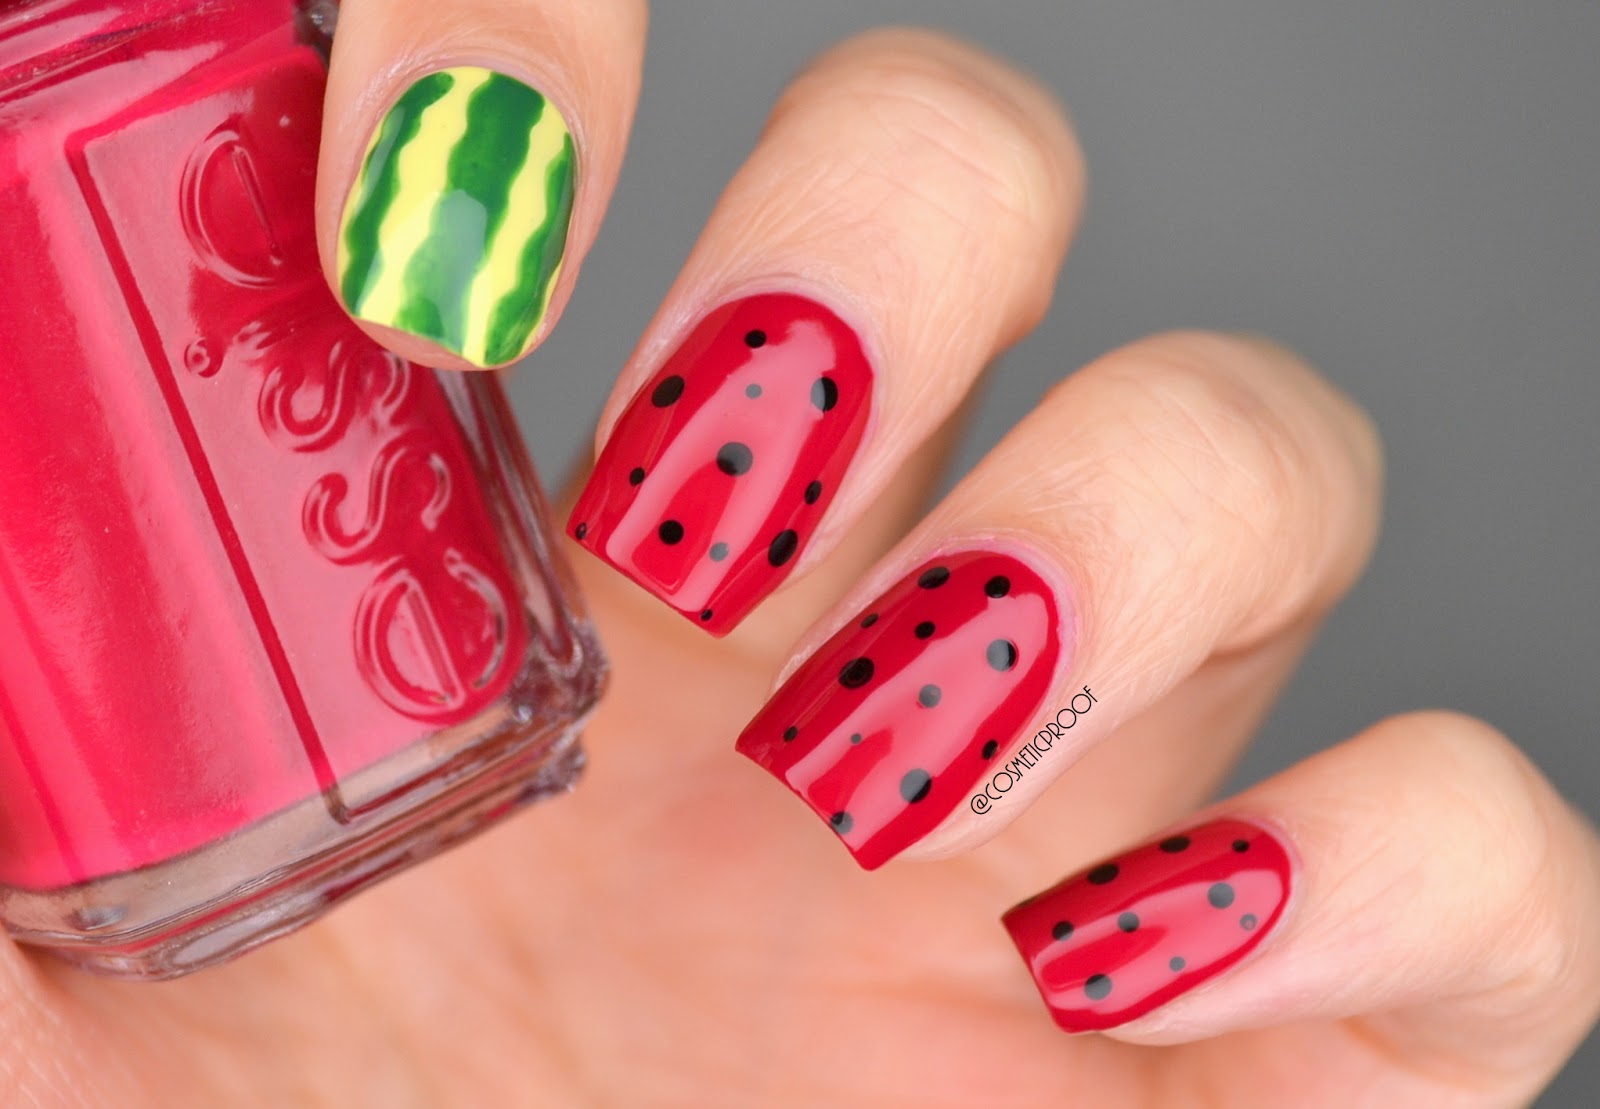 Watermelon Nail Art Tutorial for Long Nails - wide 8